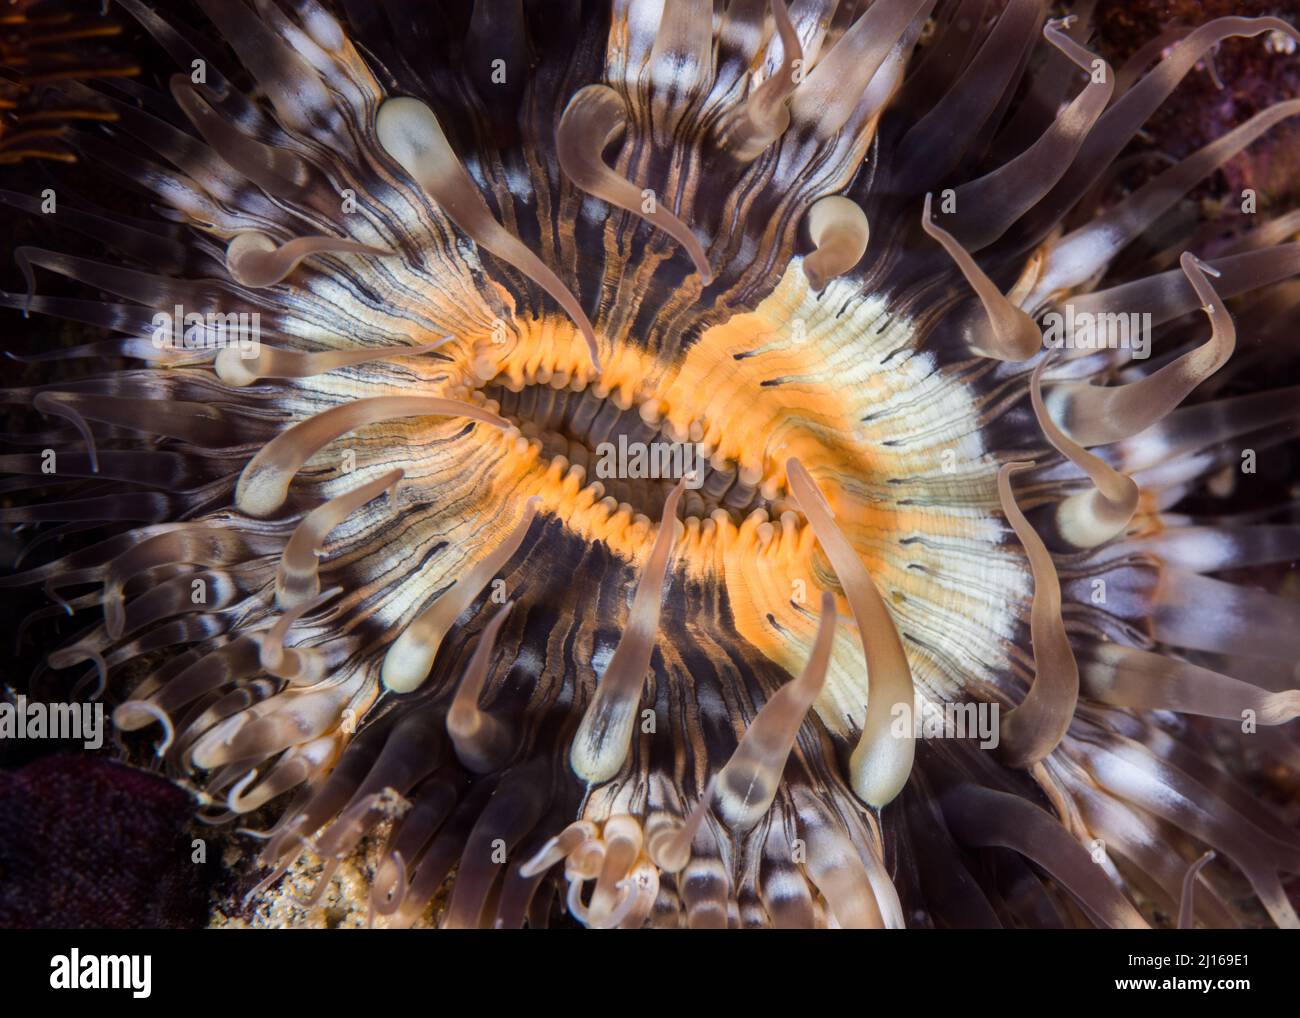 A macro picture of the mouth of a Striped anemone underwater with dark and light brown striped body, orange mouth, and short tentacles Stock Photo